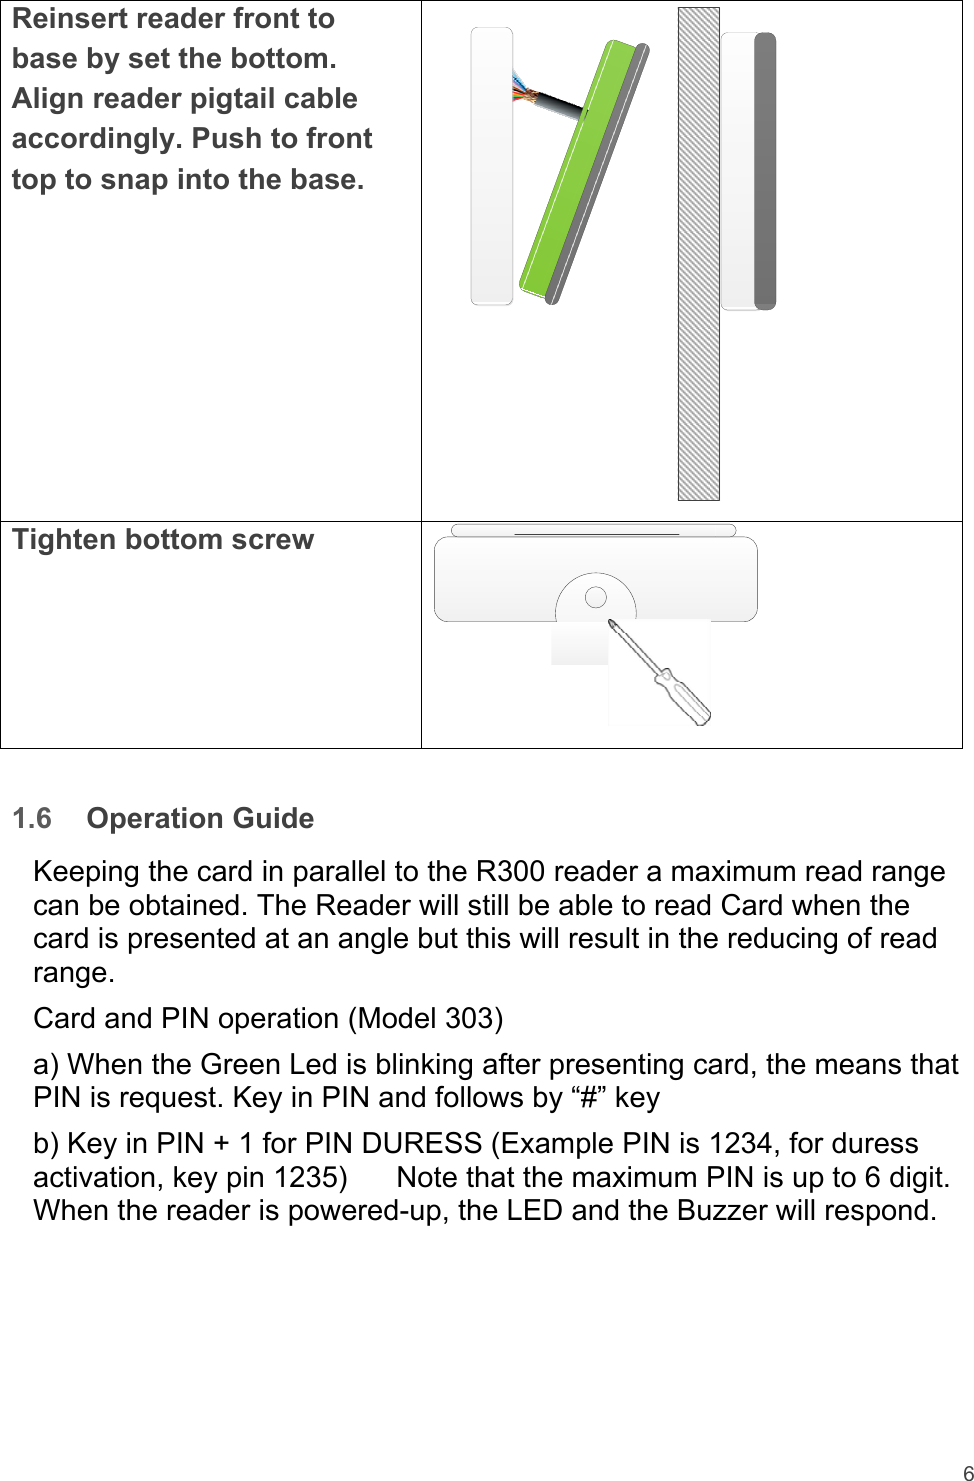 6  Reinsert reader front to base by set the bottom. Align reader pigtail cable accordingly. Push to front top to snap into the base.  Tighten bottom screw    1.6  Operation Guide  Keeping the card in parallel to the R300 reader a maximum read range can be obtained. The Reader will still be able to read Card when the card is presented at an angle but this will result in the reducing of read range.  Card and PIN operation (Model 303)  a) When the Green Led is blinking after presenting card, the means that PIN is request. Key in PIN and follows by “#” key  b) Key in PIN + 1 for PIN DURESS (Example PIN is 1234, for duress activation, key pin 1235)      Note that the maximum PIN is up to 6 digit. When the reader is powered-up, the LED and the Buzzer will respond.        